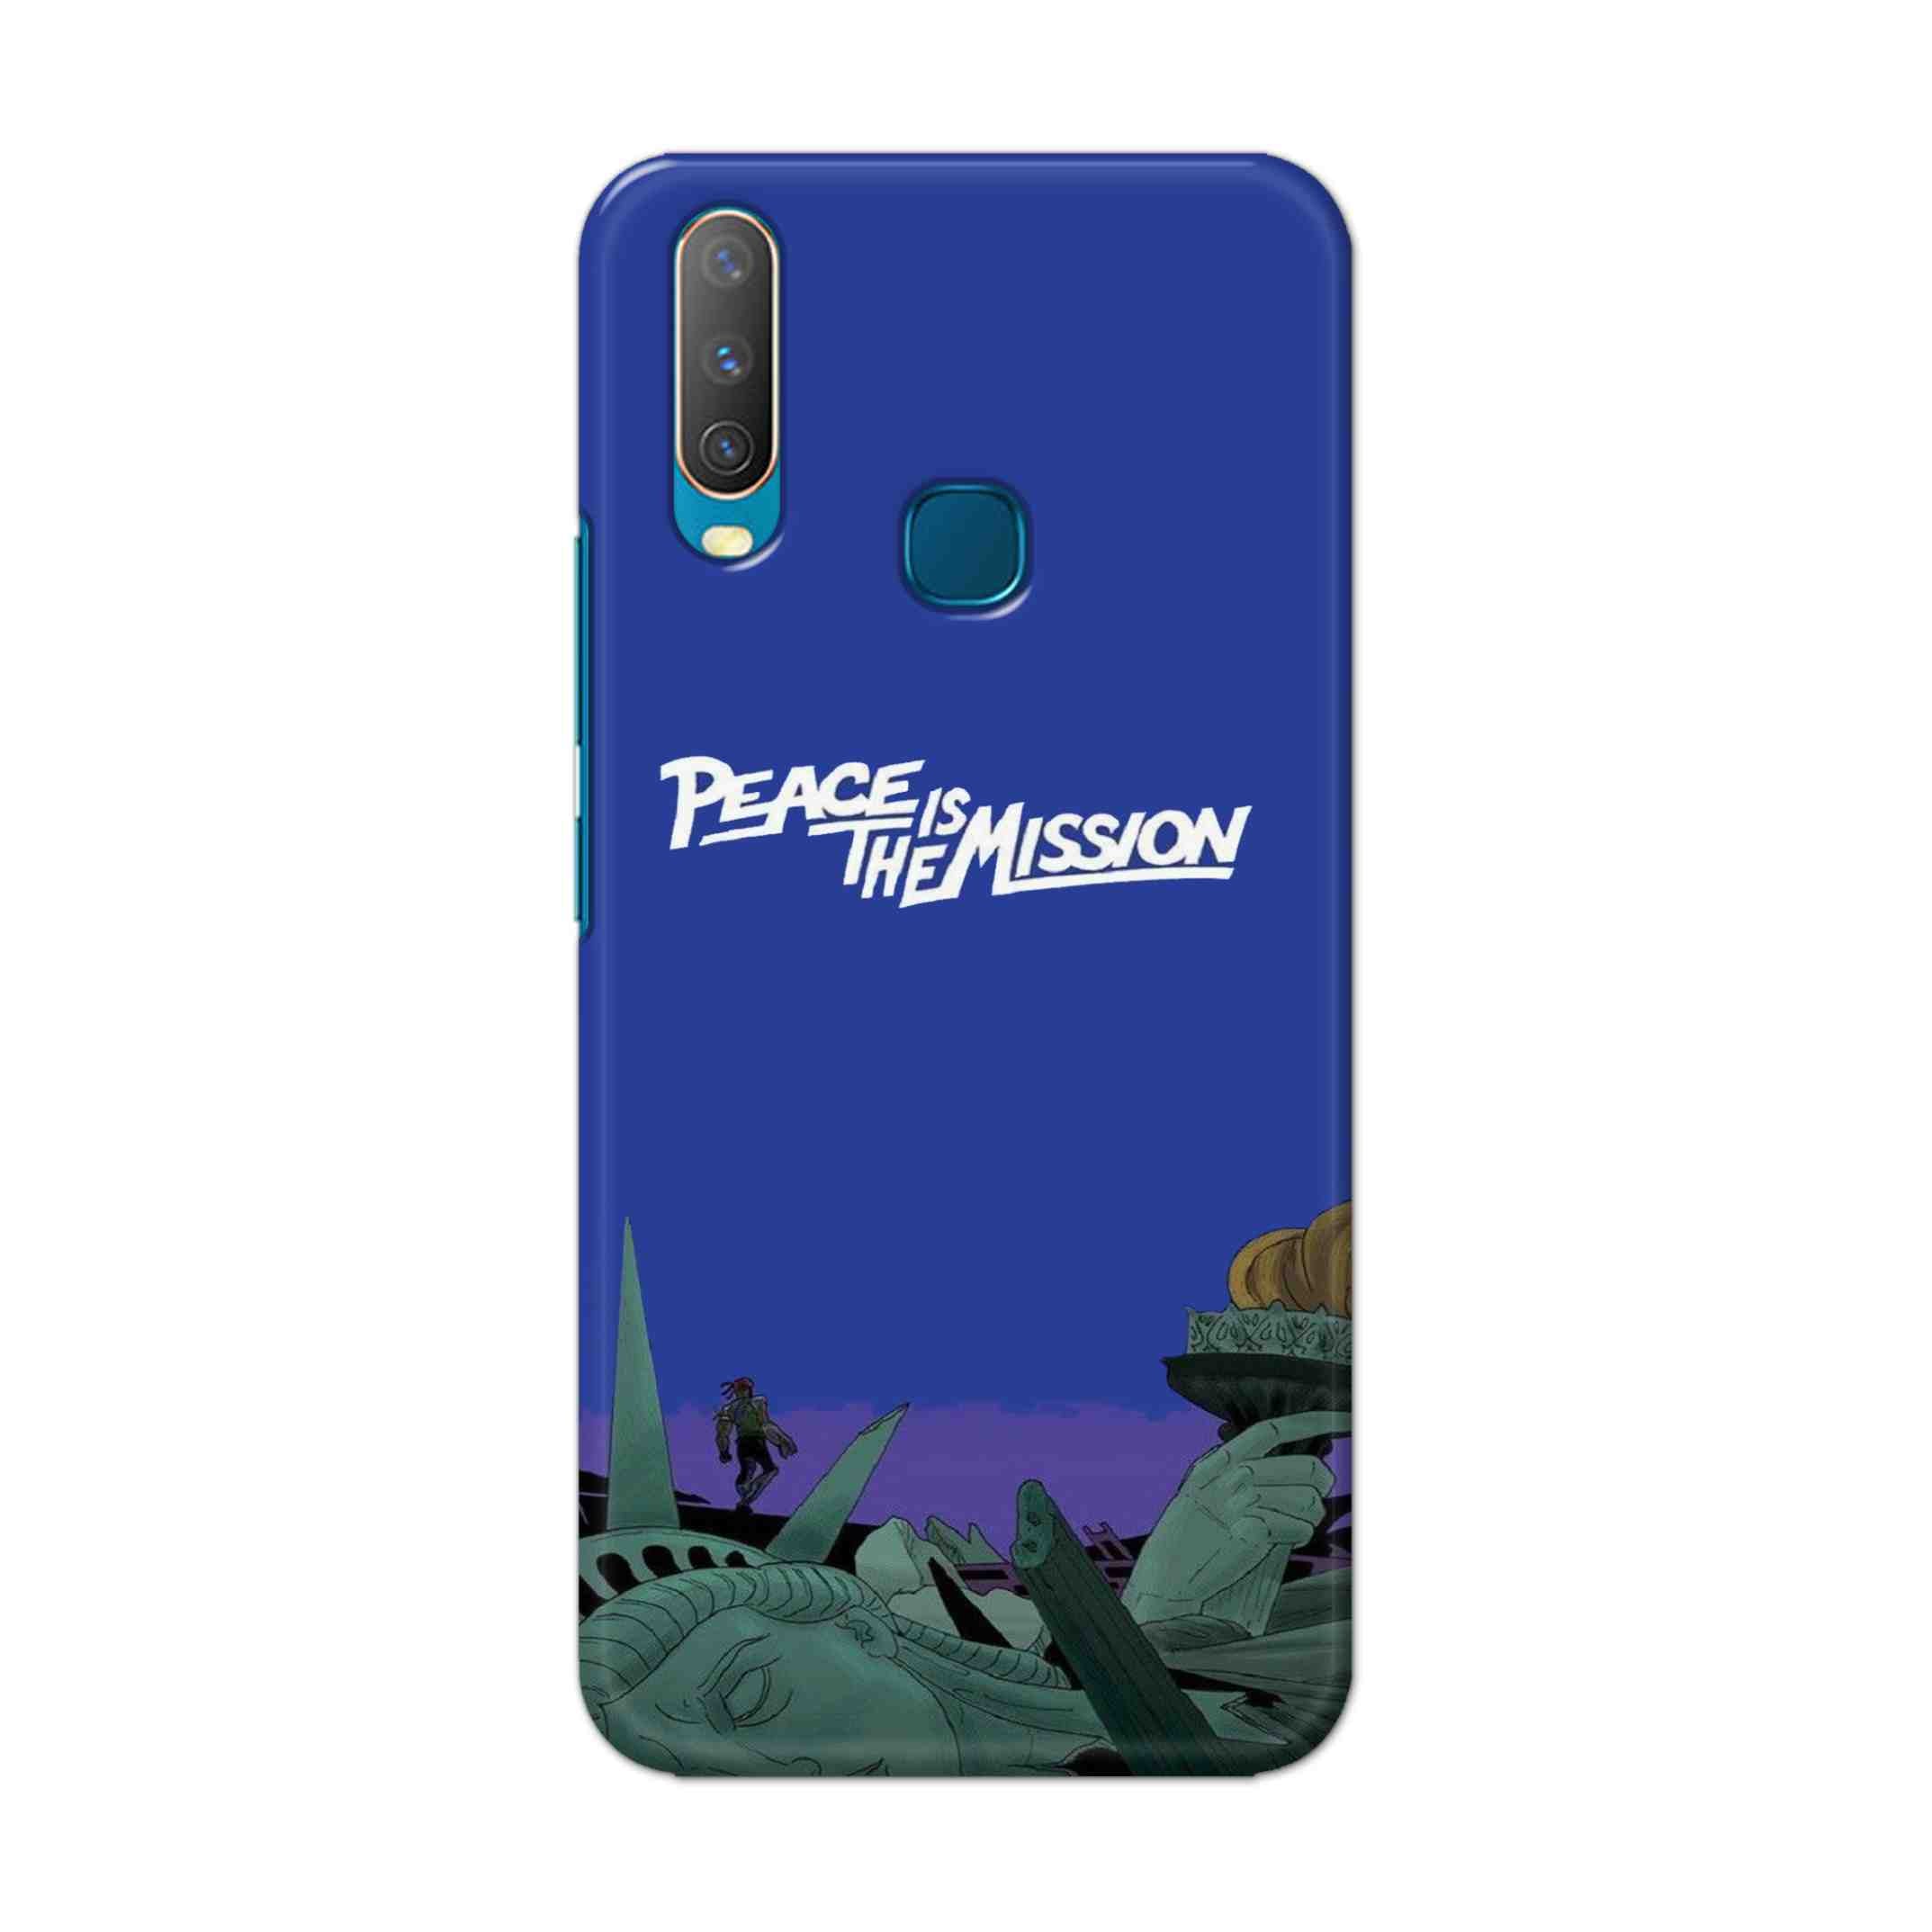 Buy Peace Is The Misson Hard Back Mobile Phone Case Cover For Vivo Y17 / U10 Online